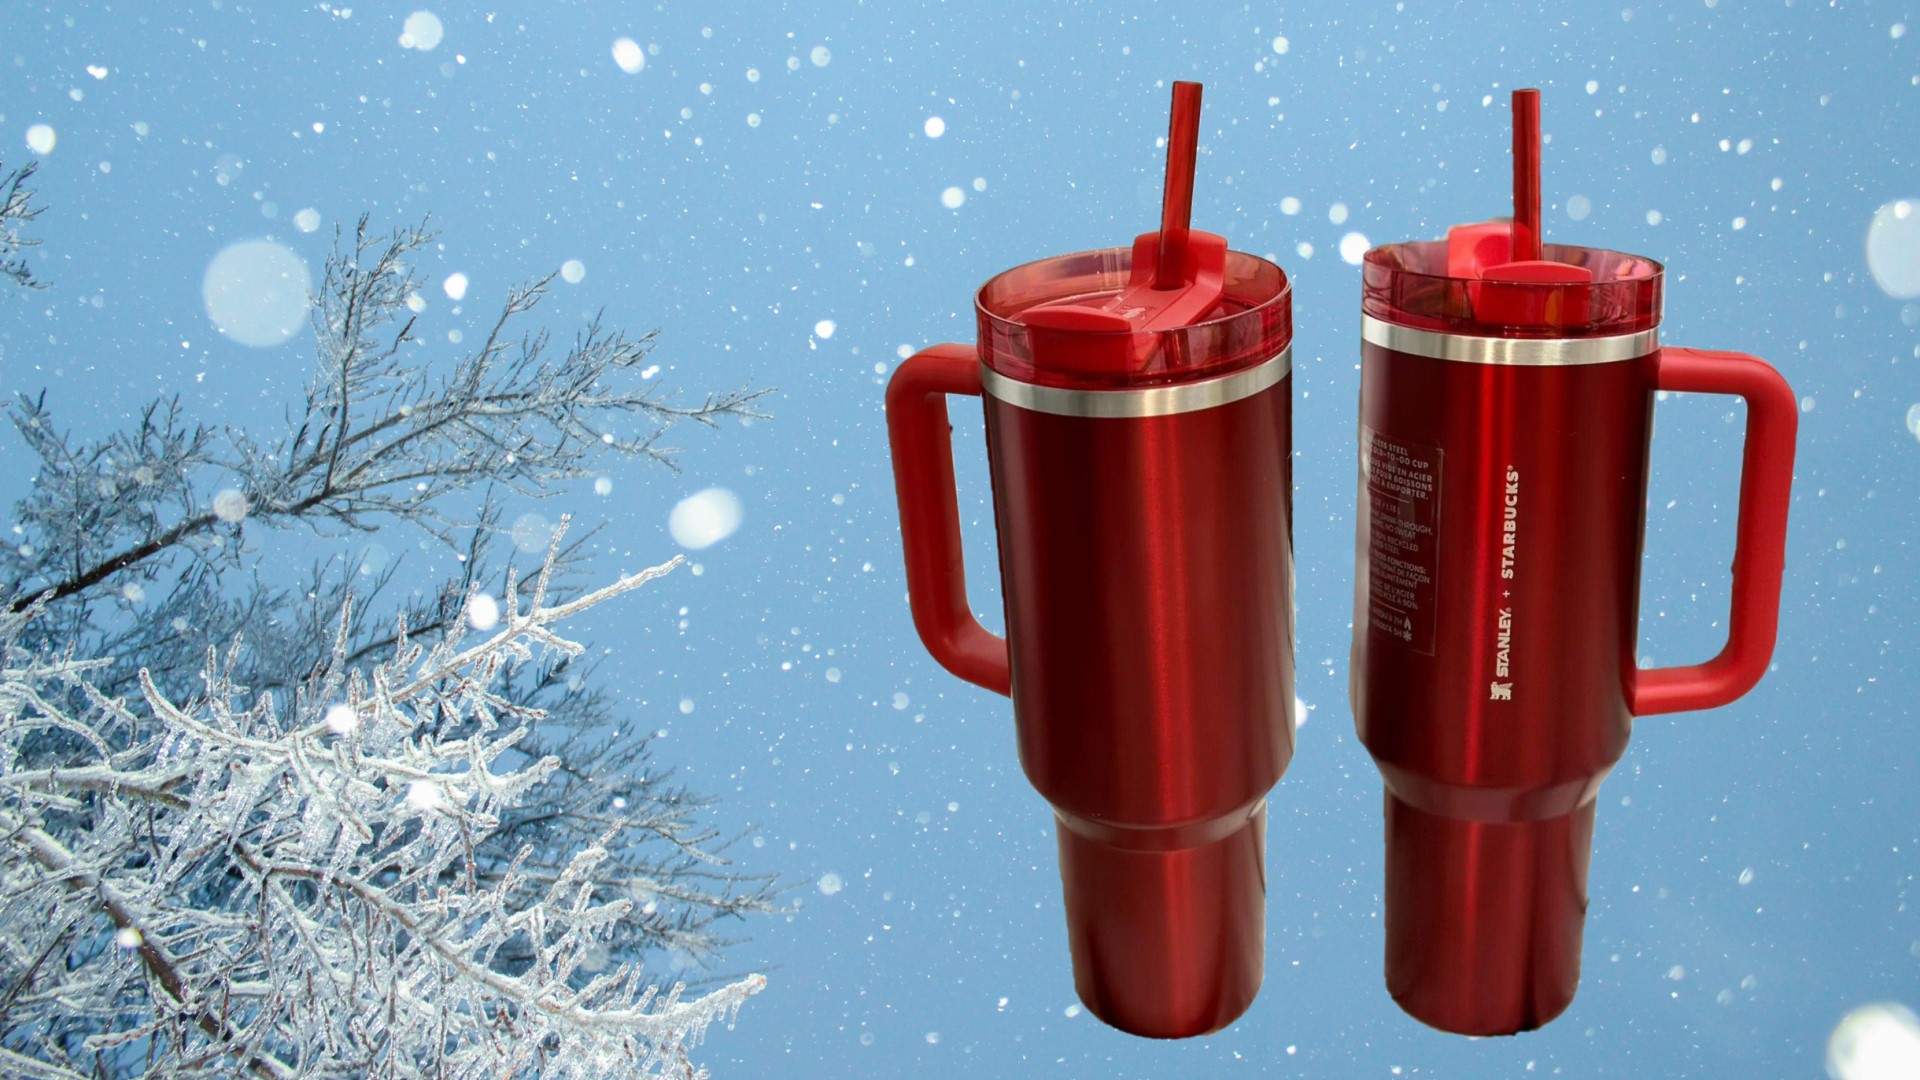 Starbucks Stanley Holiday Tumblers Are Going for $100+ - Resell